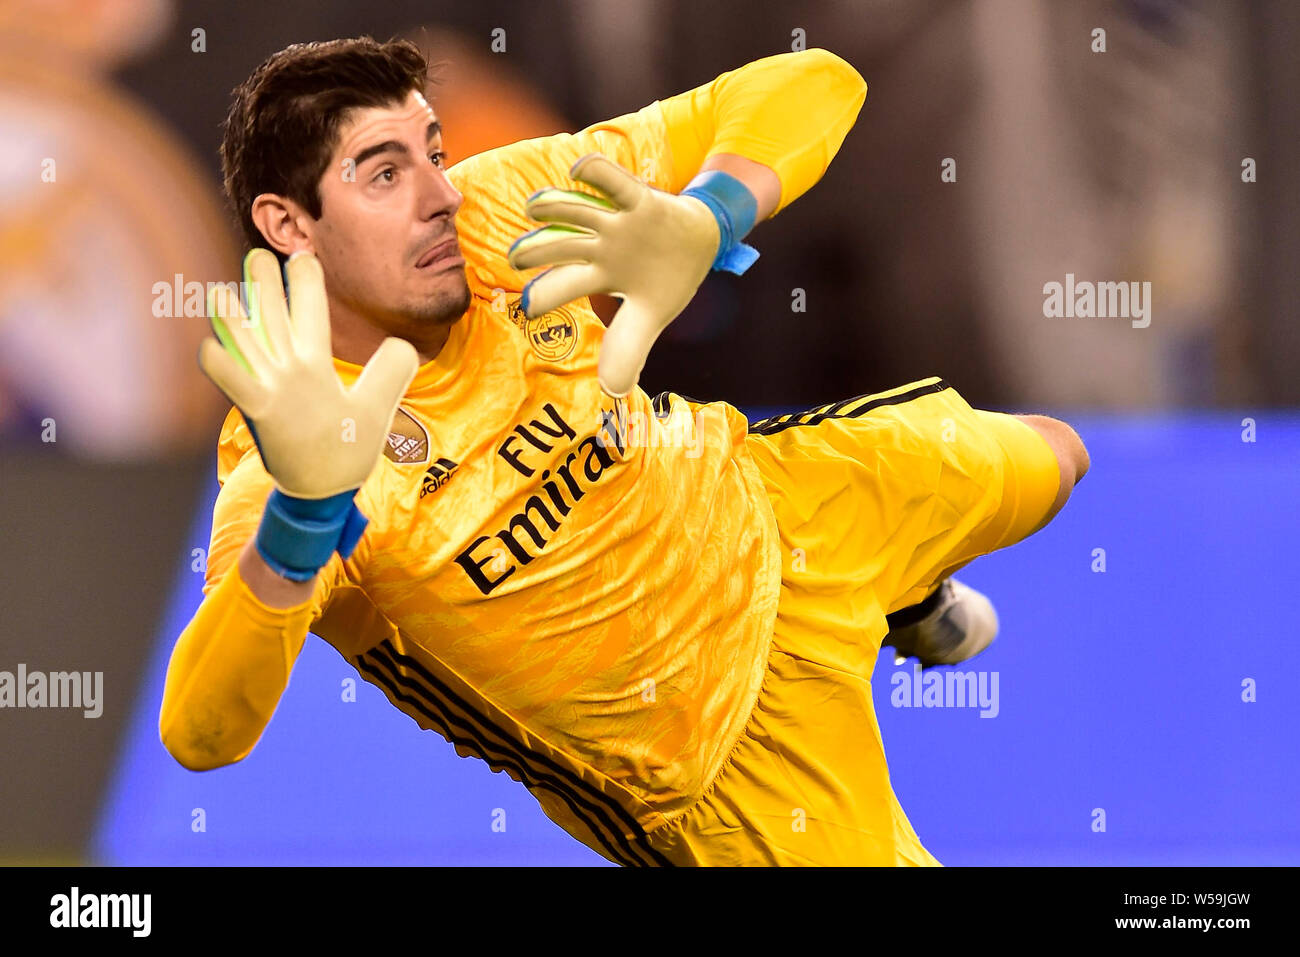 East Rutherford, New Jersey, USA. 26th July, 2019. Real Madrid goalkeeper  THIBAUT COURTOIS (13) in action during the International Champions Cup  match at MetLife Stadium in East Rutherford New Jersey Atletico Madrid